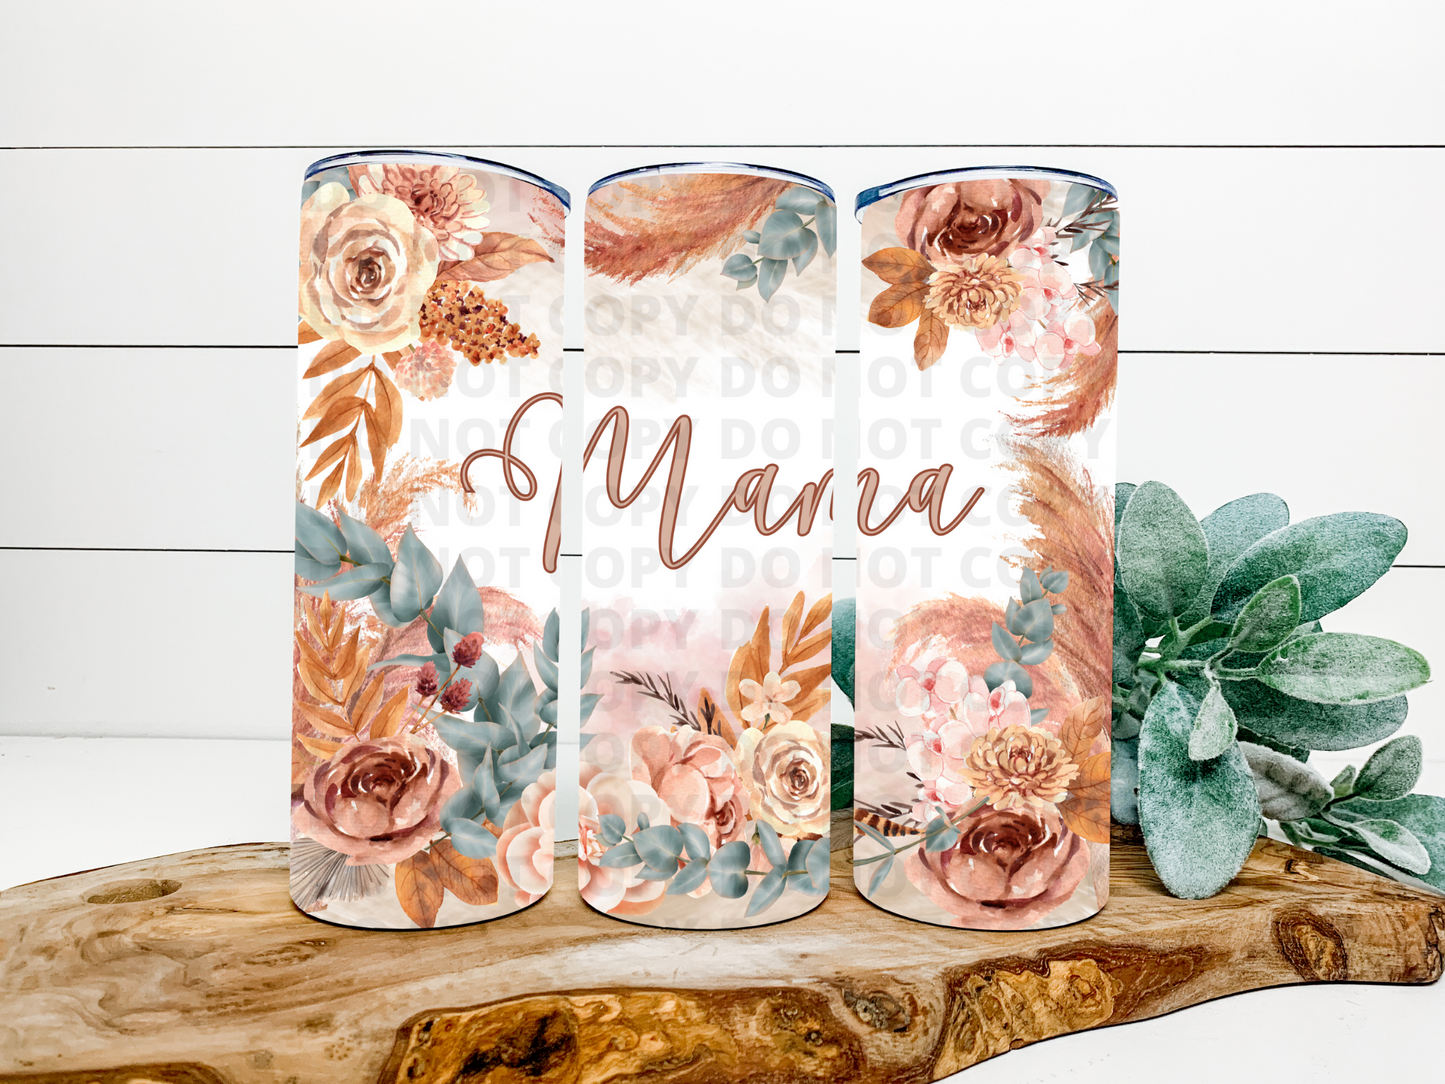 Mama Floral Stainless Steel Tumbler